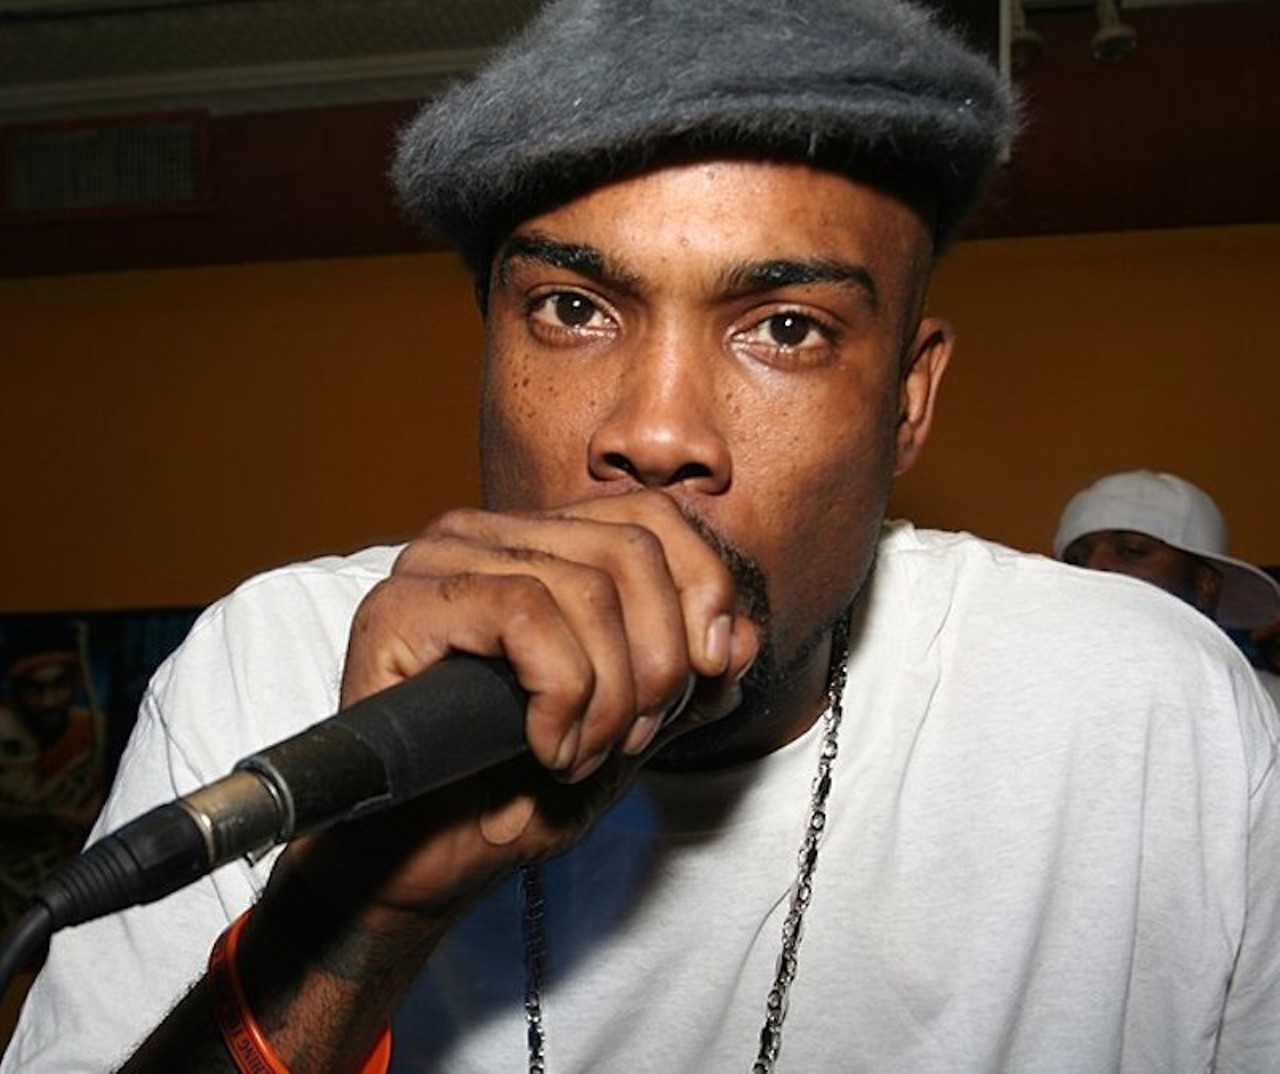 Osborn: Proof
Besides being one of Eminem’s good friends and hype man, Proof was also a member of the group D12. In 2006, Proof was gunned down after an altercation over a game of pool. Alongside Proof, rapper Esham also attended Osborn High School. 